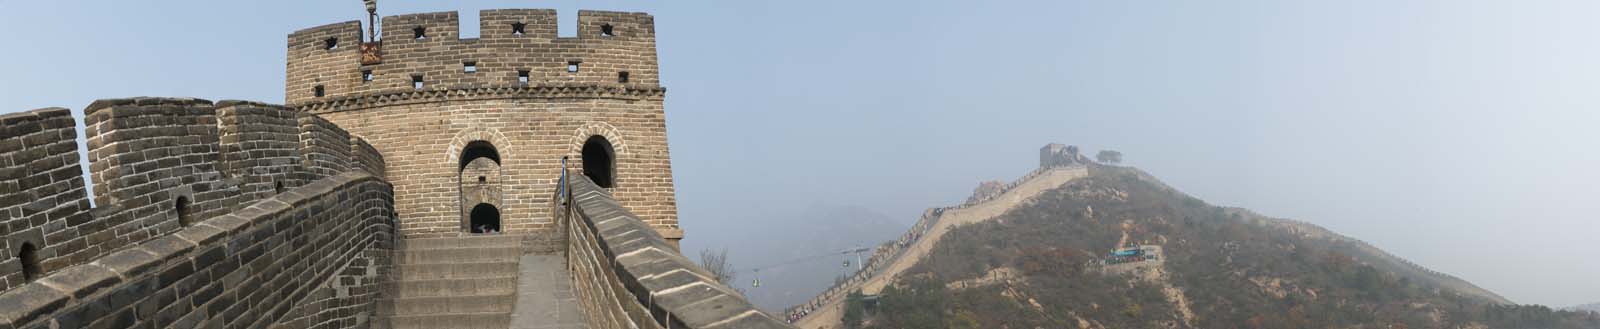 photo,material,free,landscape,picture,stock photo,Creative Commons,Great Wall panorama, Walls, Lou Castle, Xiongnu, Emperor Guangwu of Han